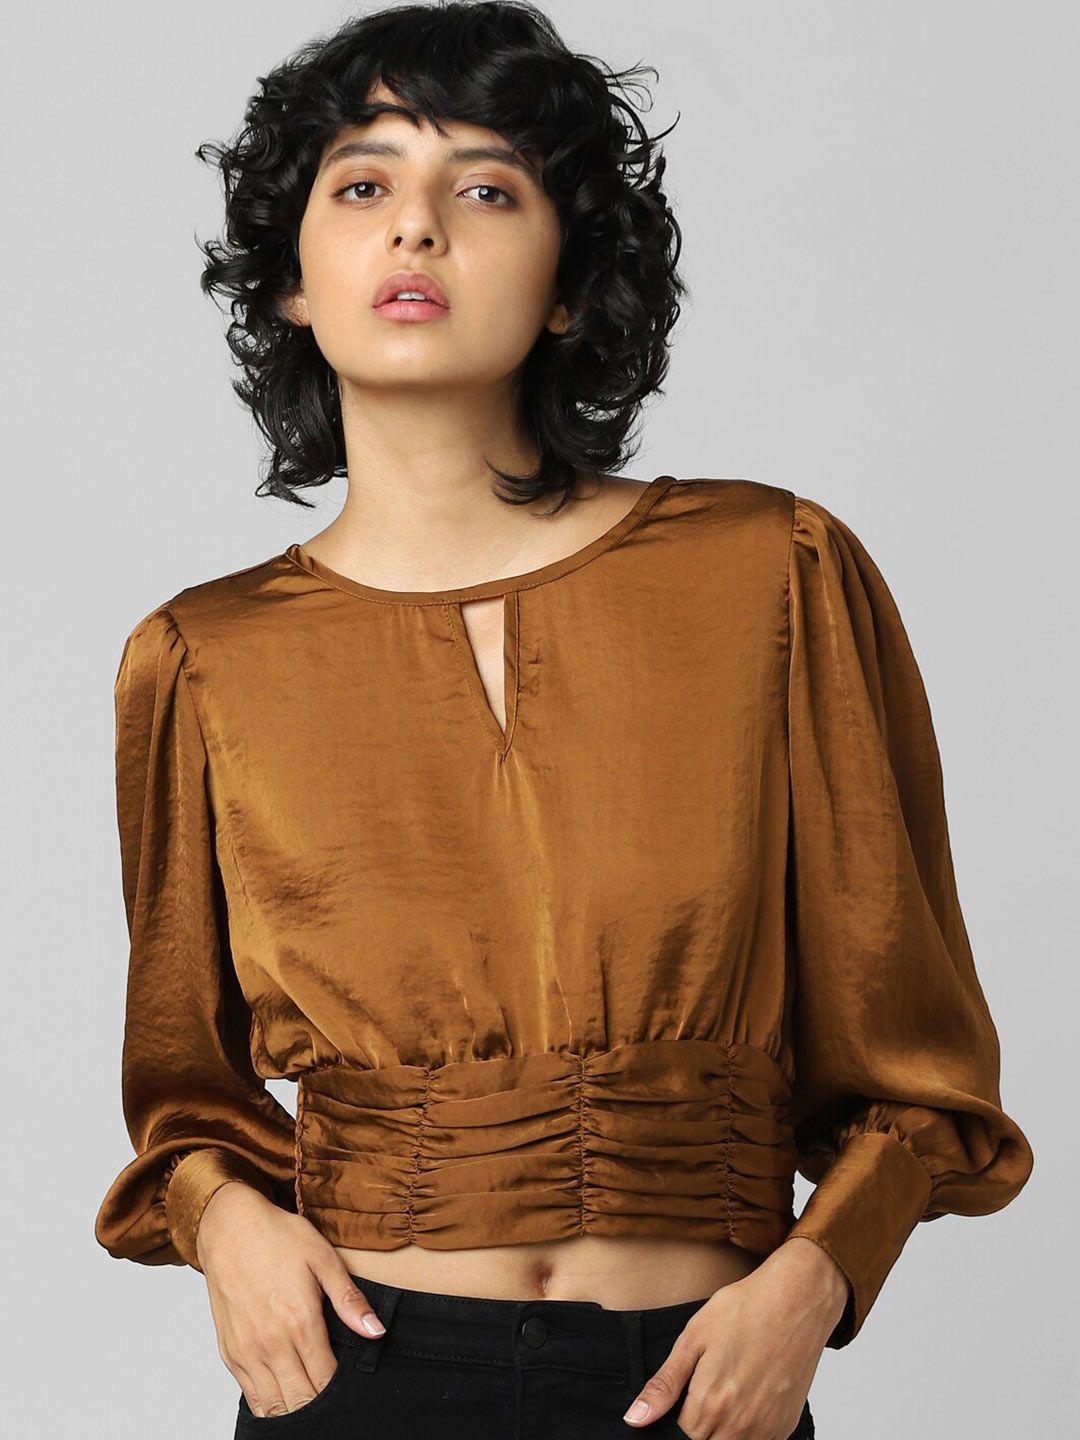 only bronze-toned satin finish crop top